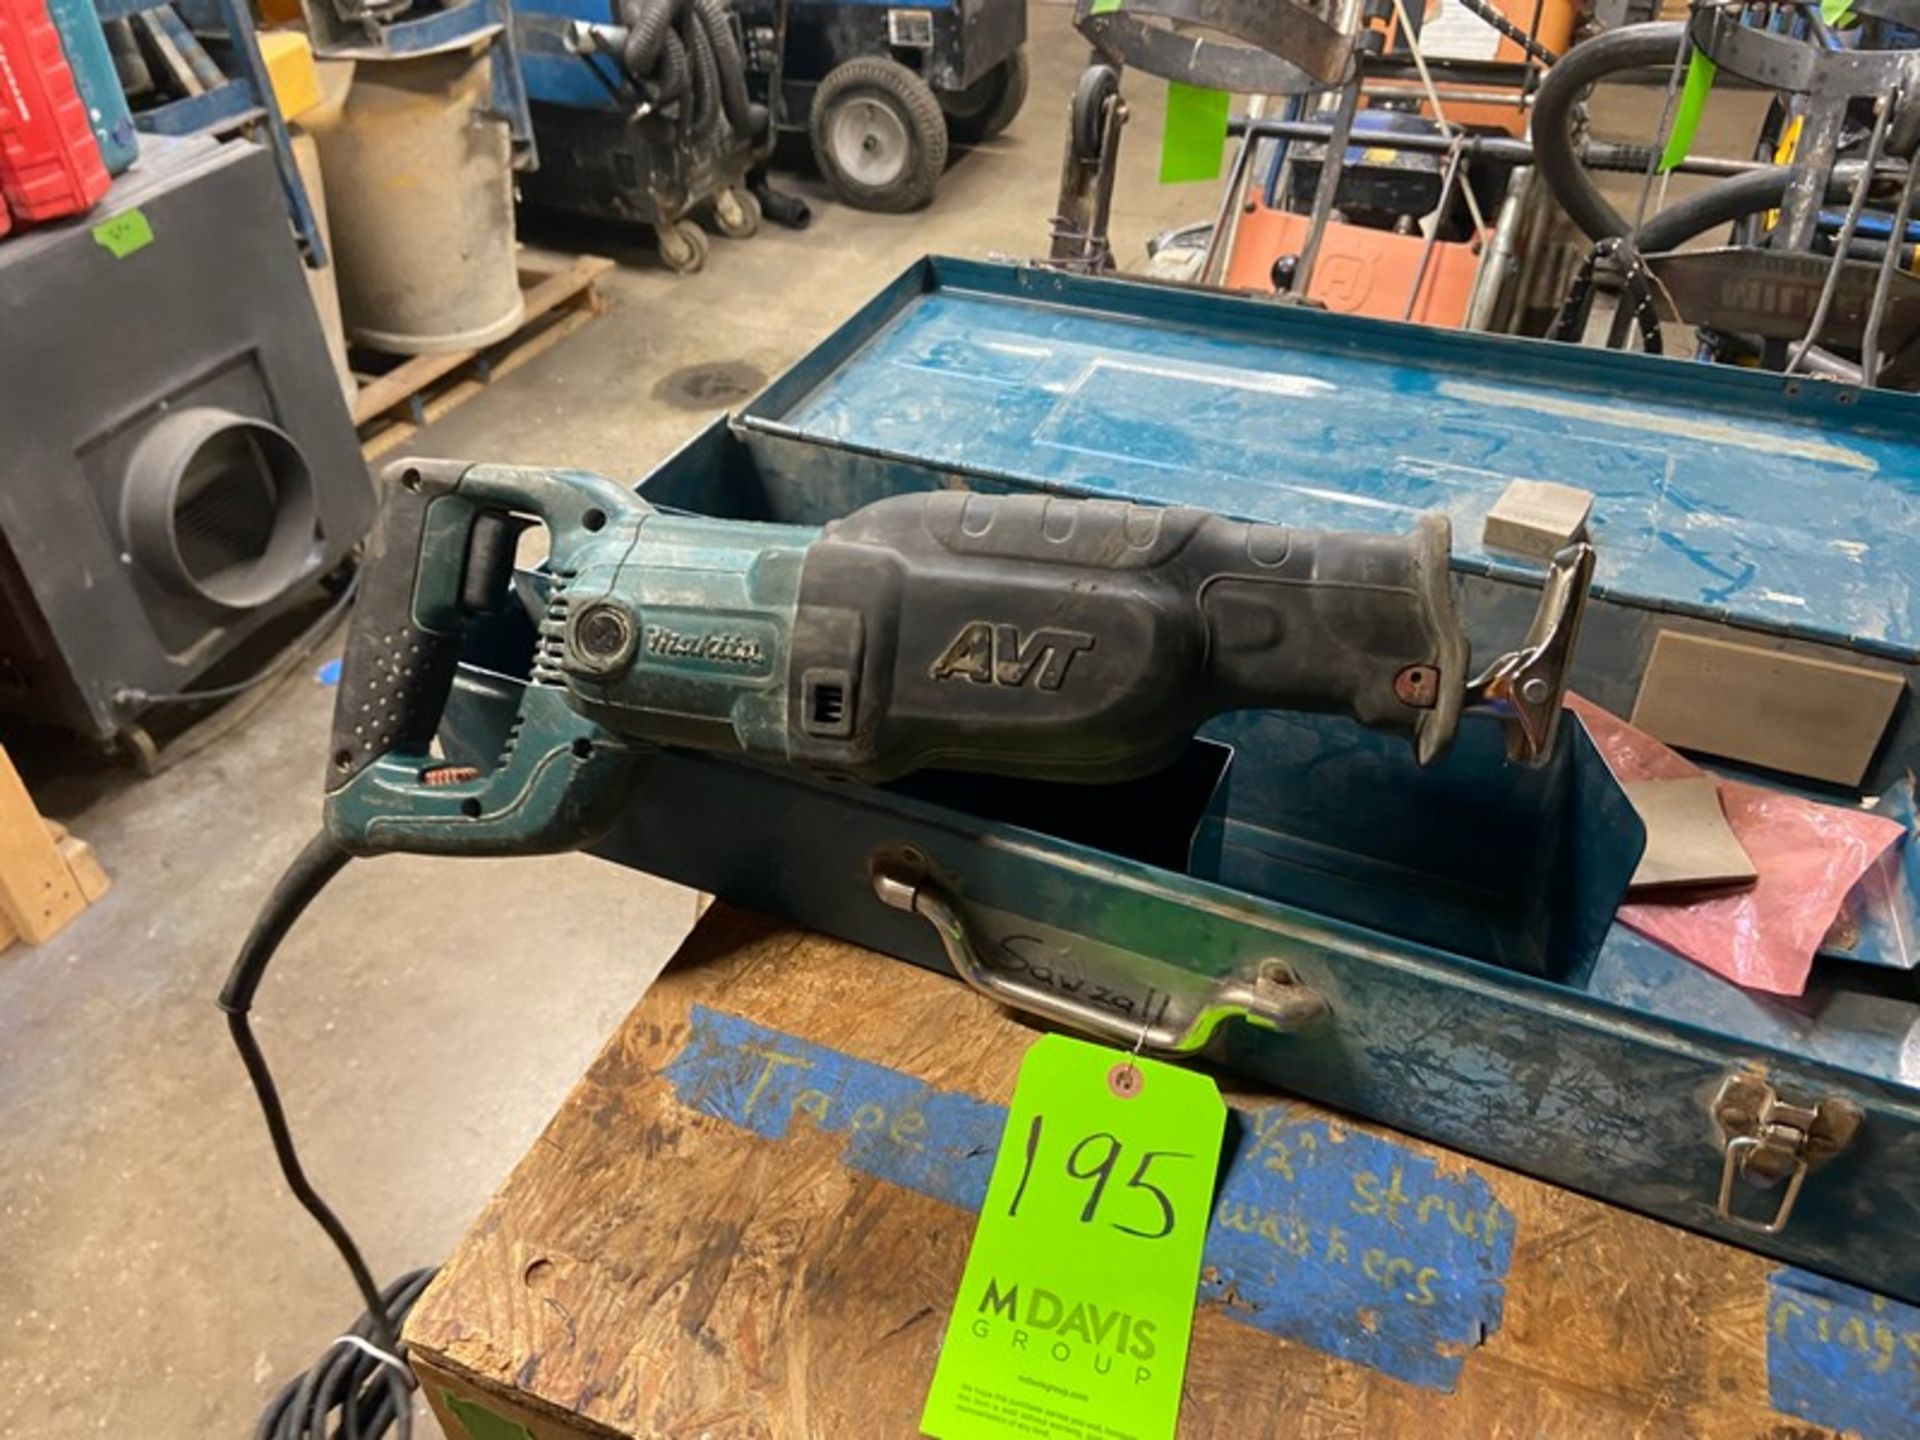 Makita AVT Sawzall Power Tool, S/N 101117A, with Power Cord & Hard Case (LOCATED IN MONROEVILLE,